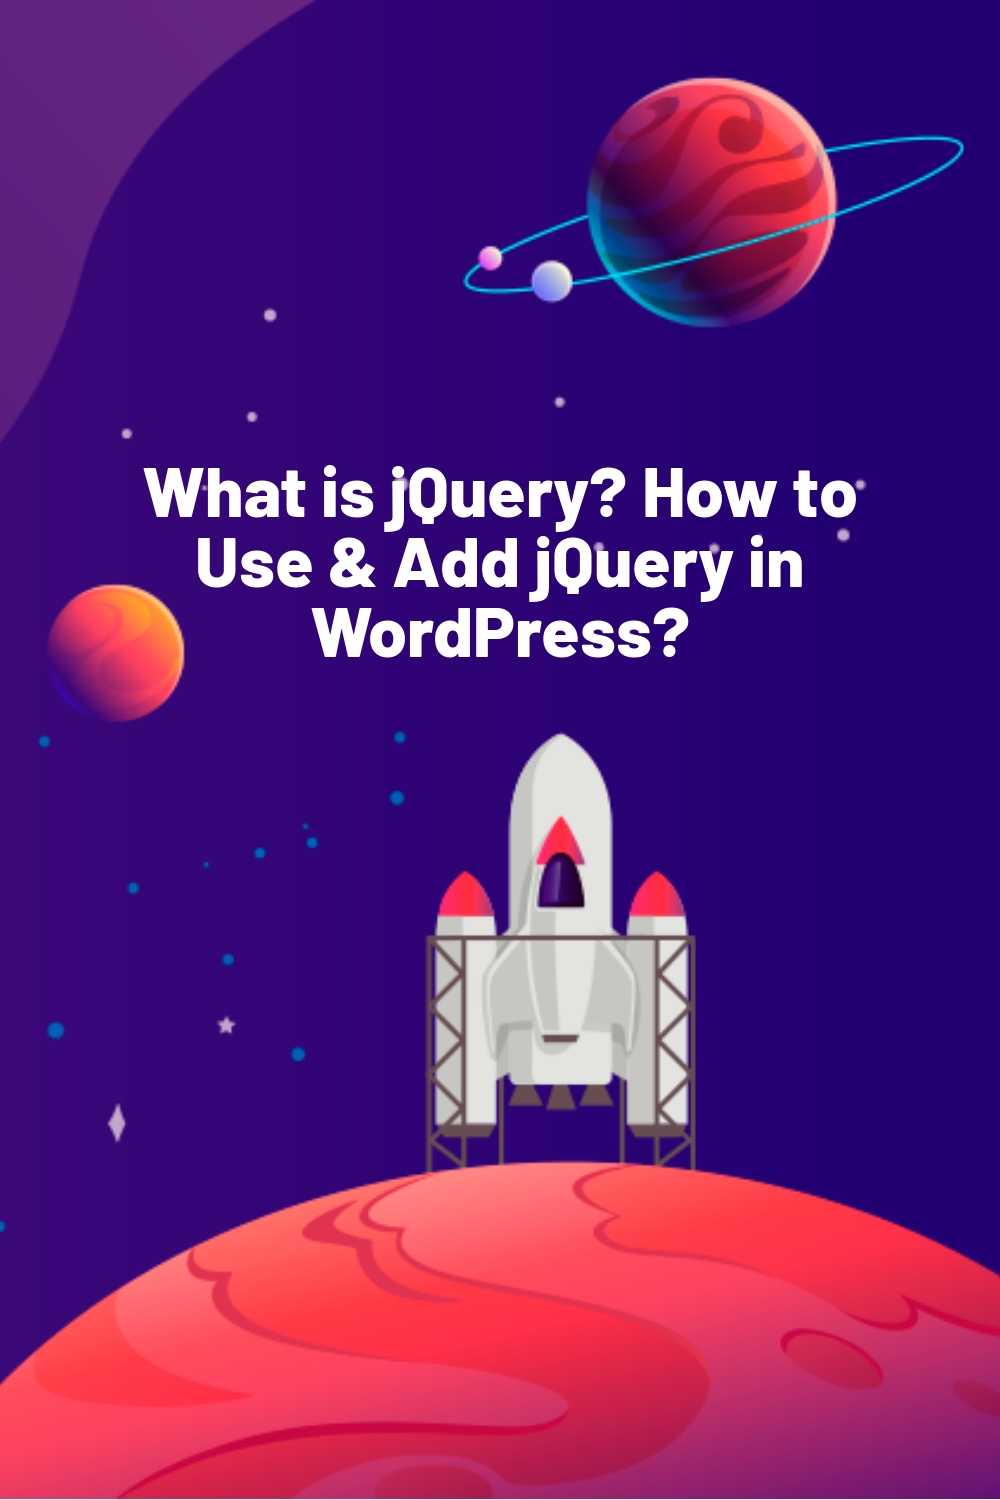 What is jQuery? How to Use & Add jQuery in WordPress?